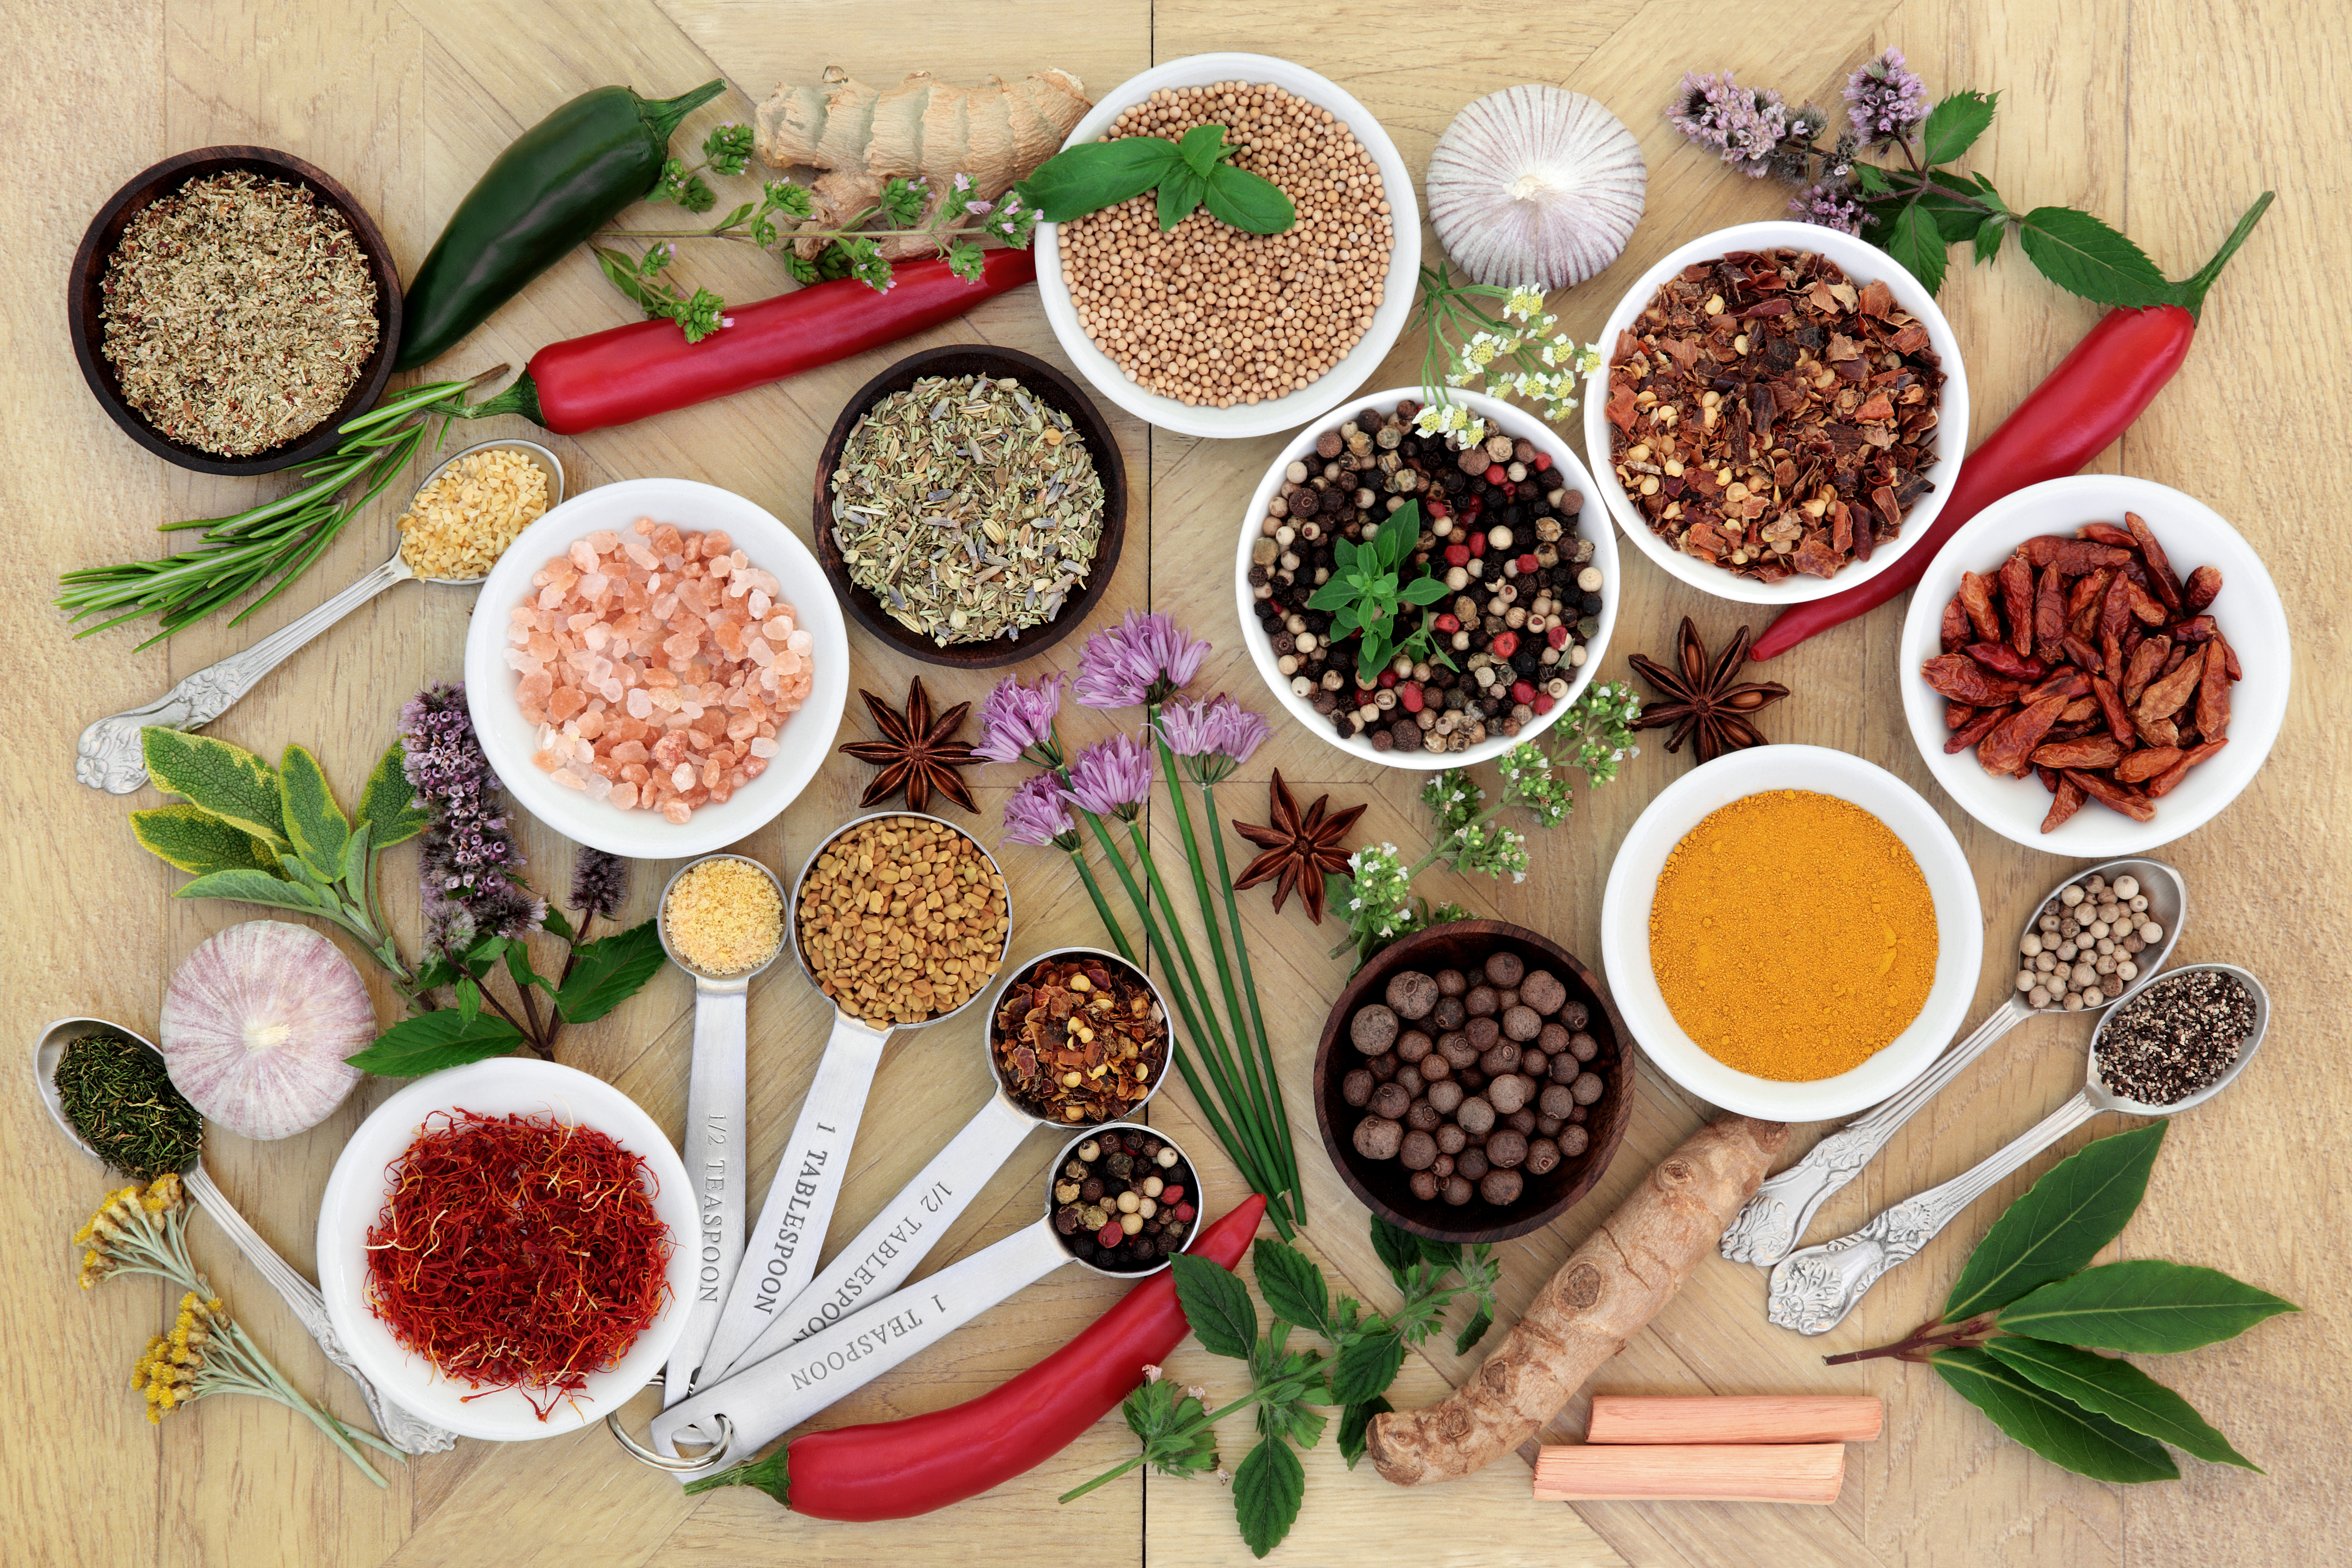 A table with bowls of seasonings and spices alongside various green herbs, red peppers, roots, and flowers.